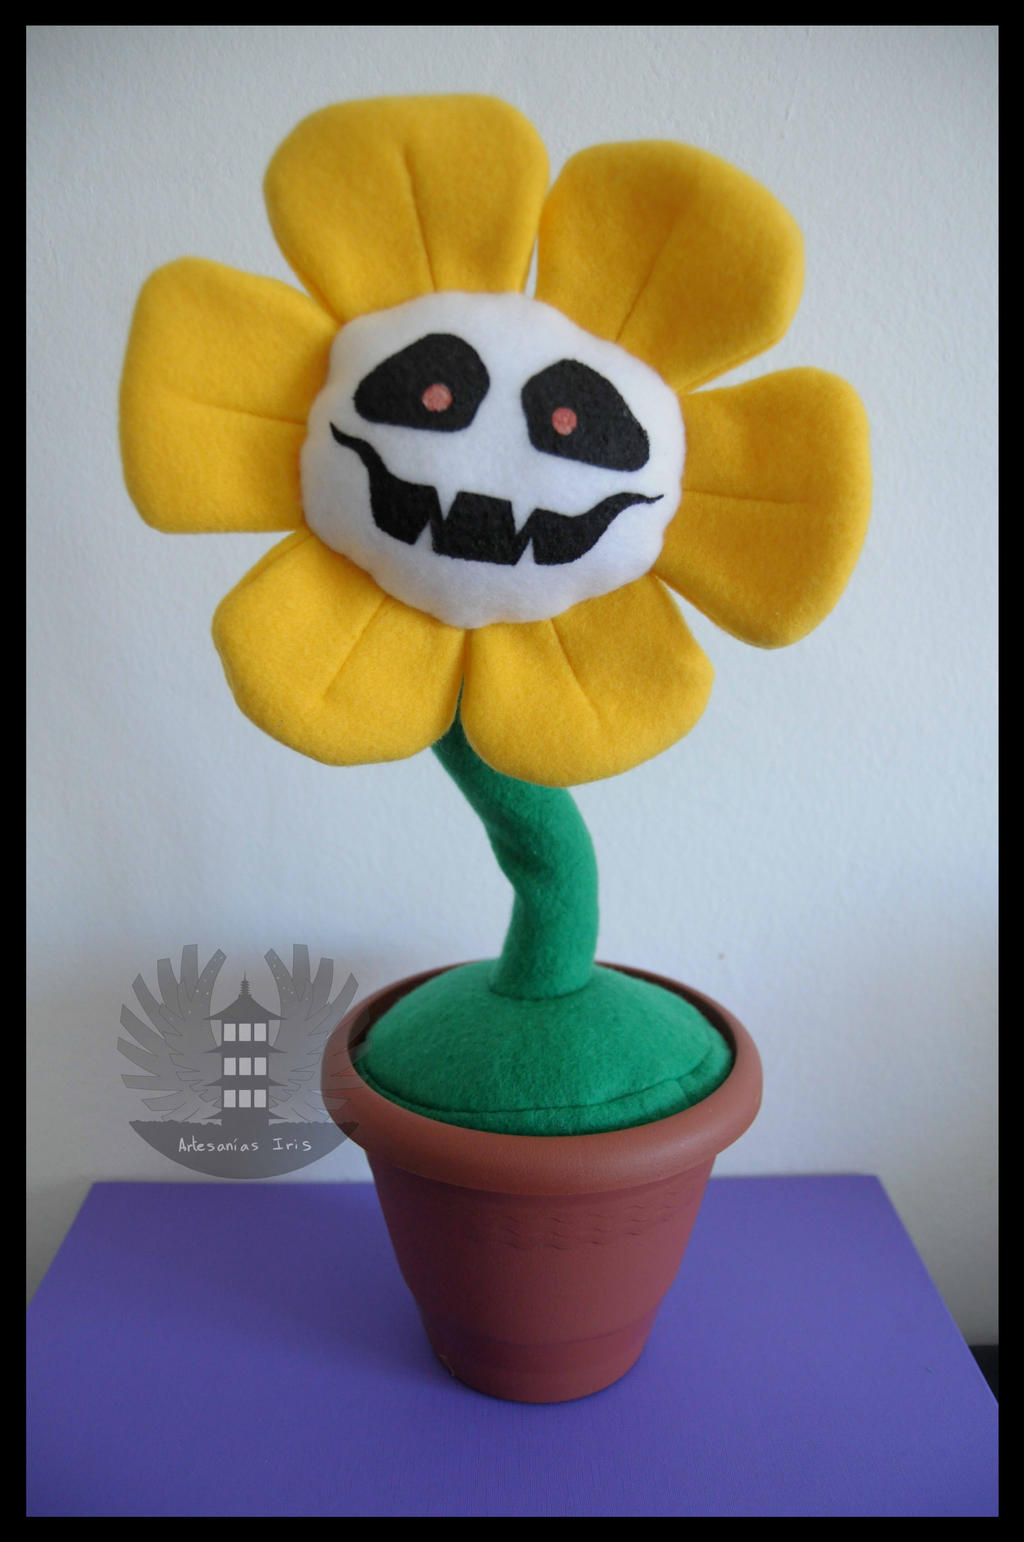 Creator of the original Dancing Flowey plush from 2016 is dissapointed  Fangamer used their idea without permission. : r/Undertale